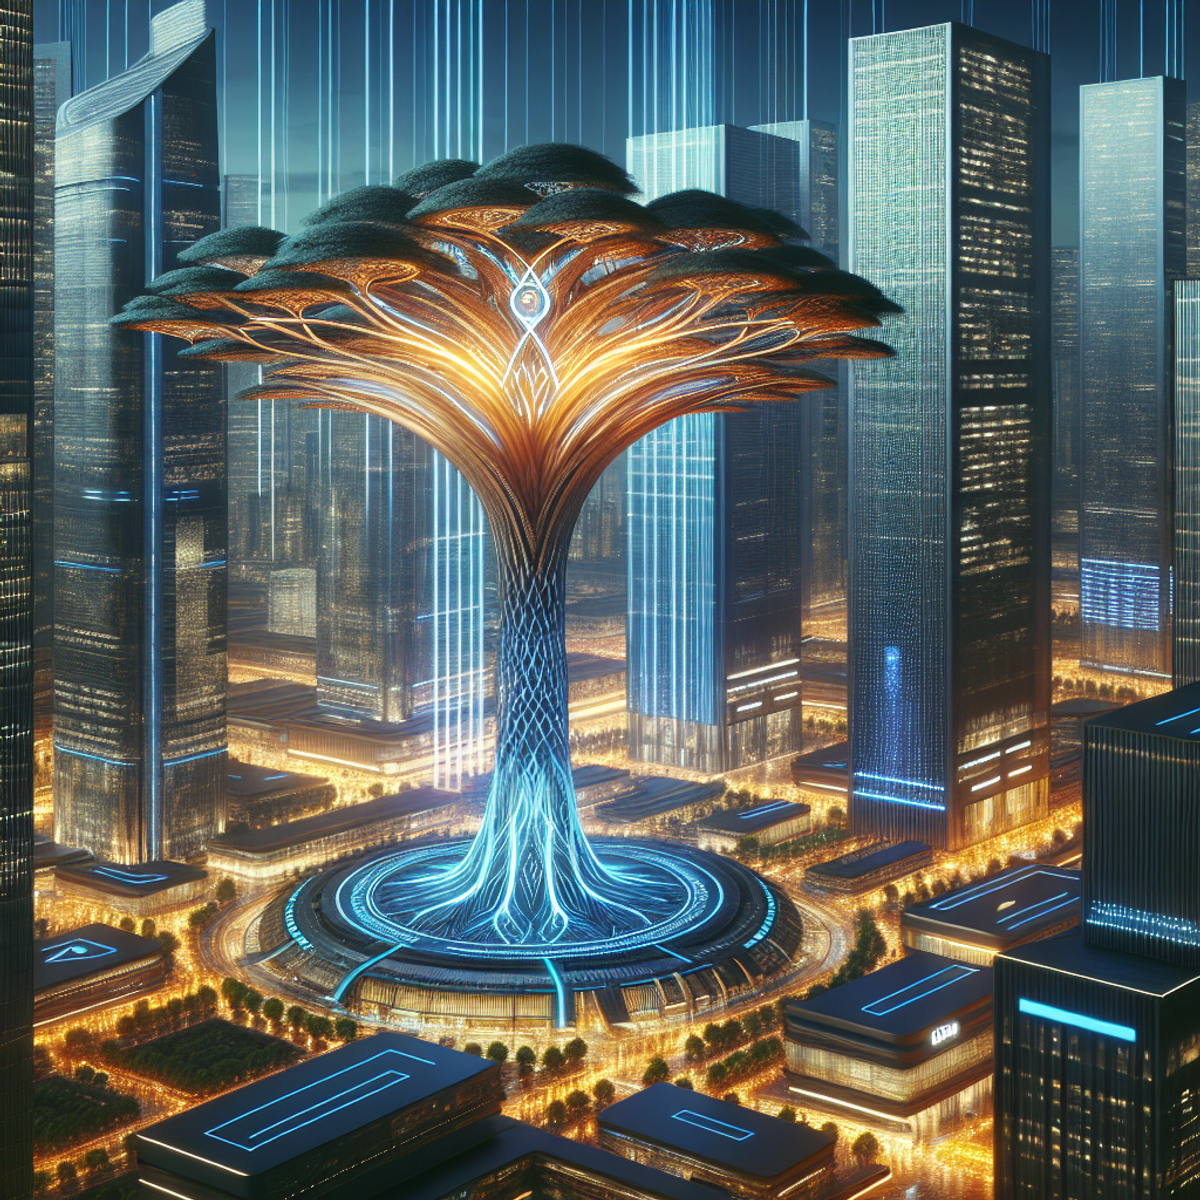 Futuristic cityscape with radiant, monumental rainforest tree structure at center.